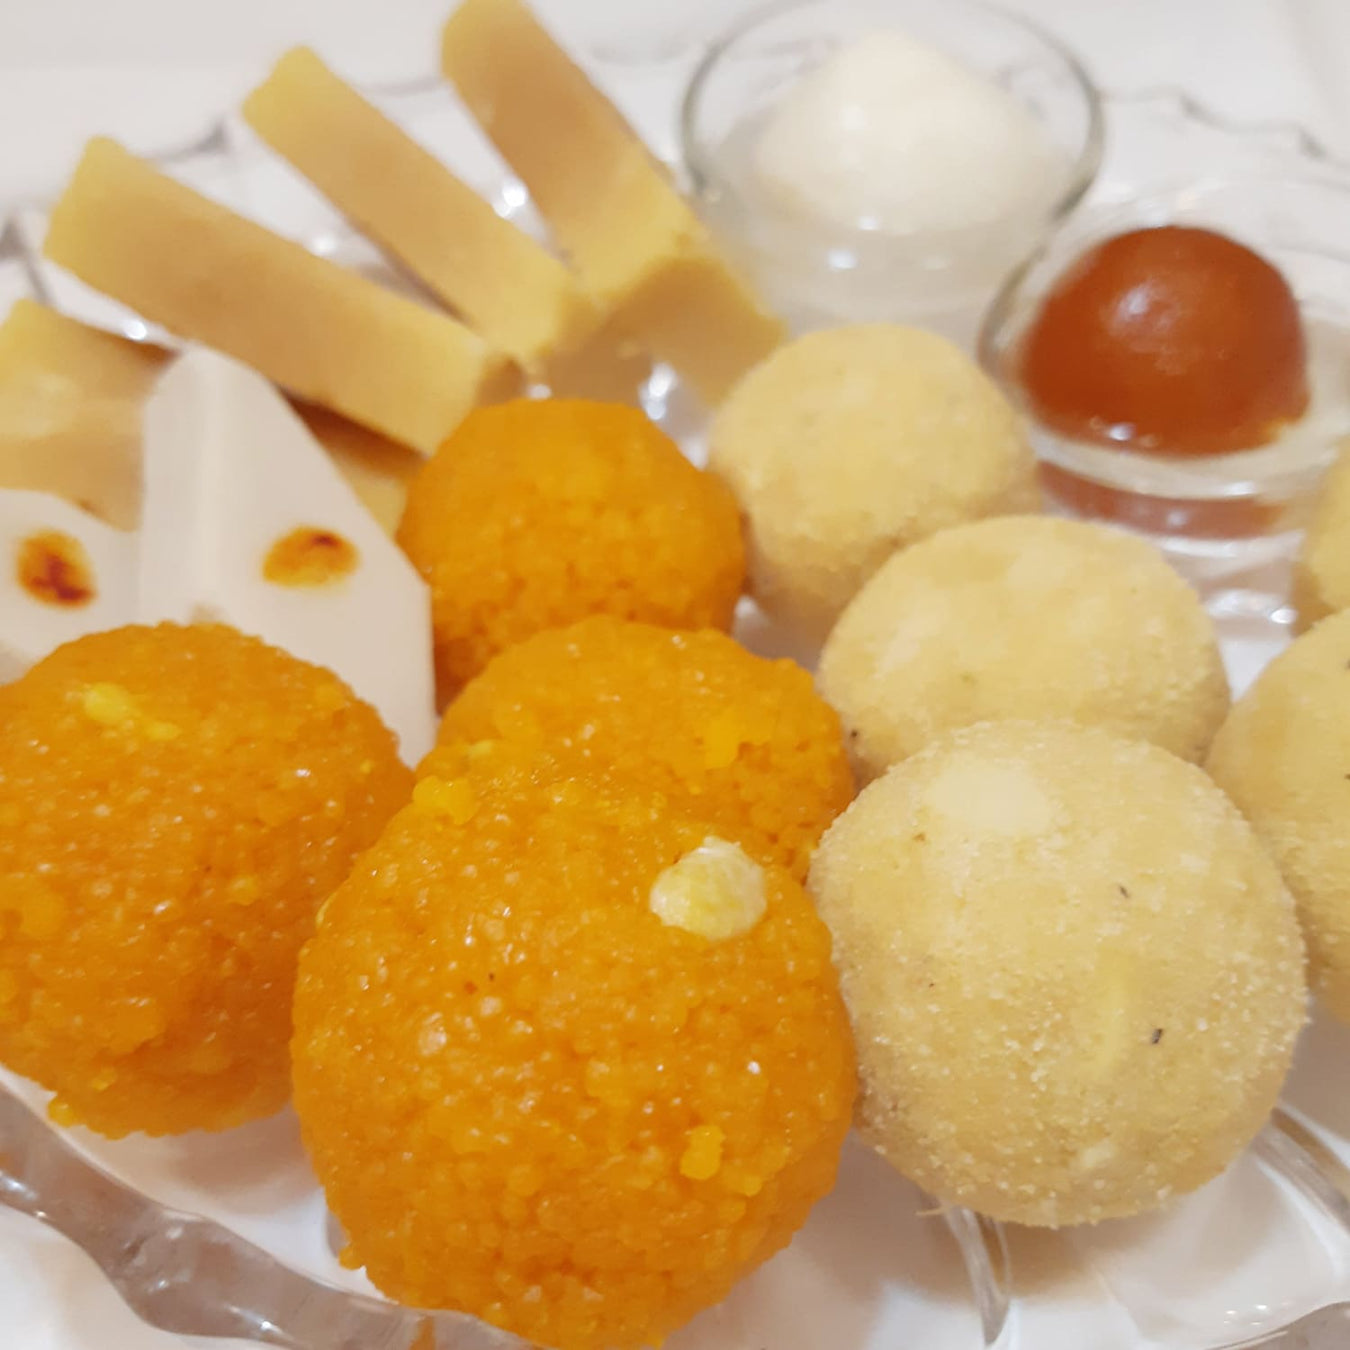 Mithai (Indian Sweets) and Mixes